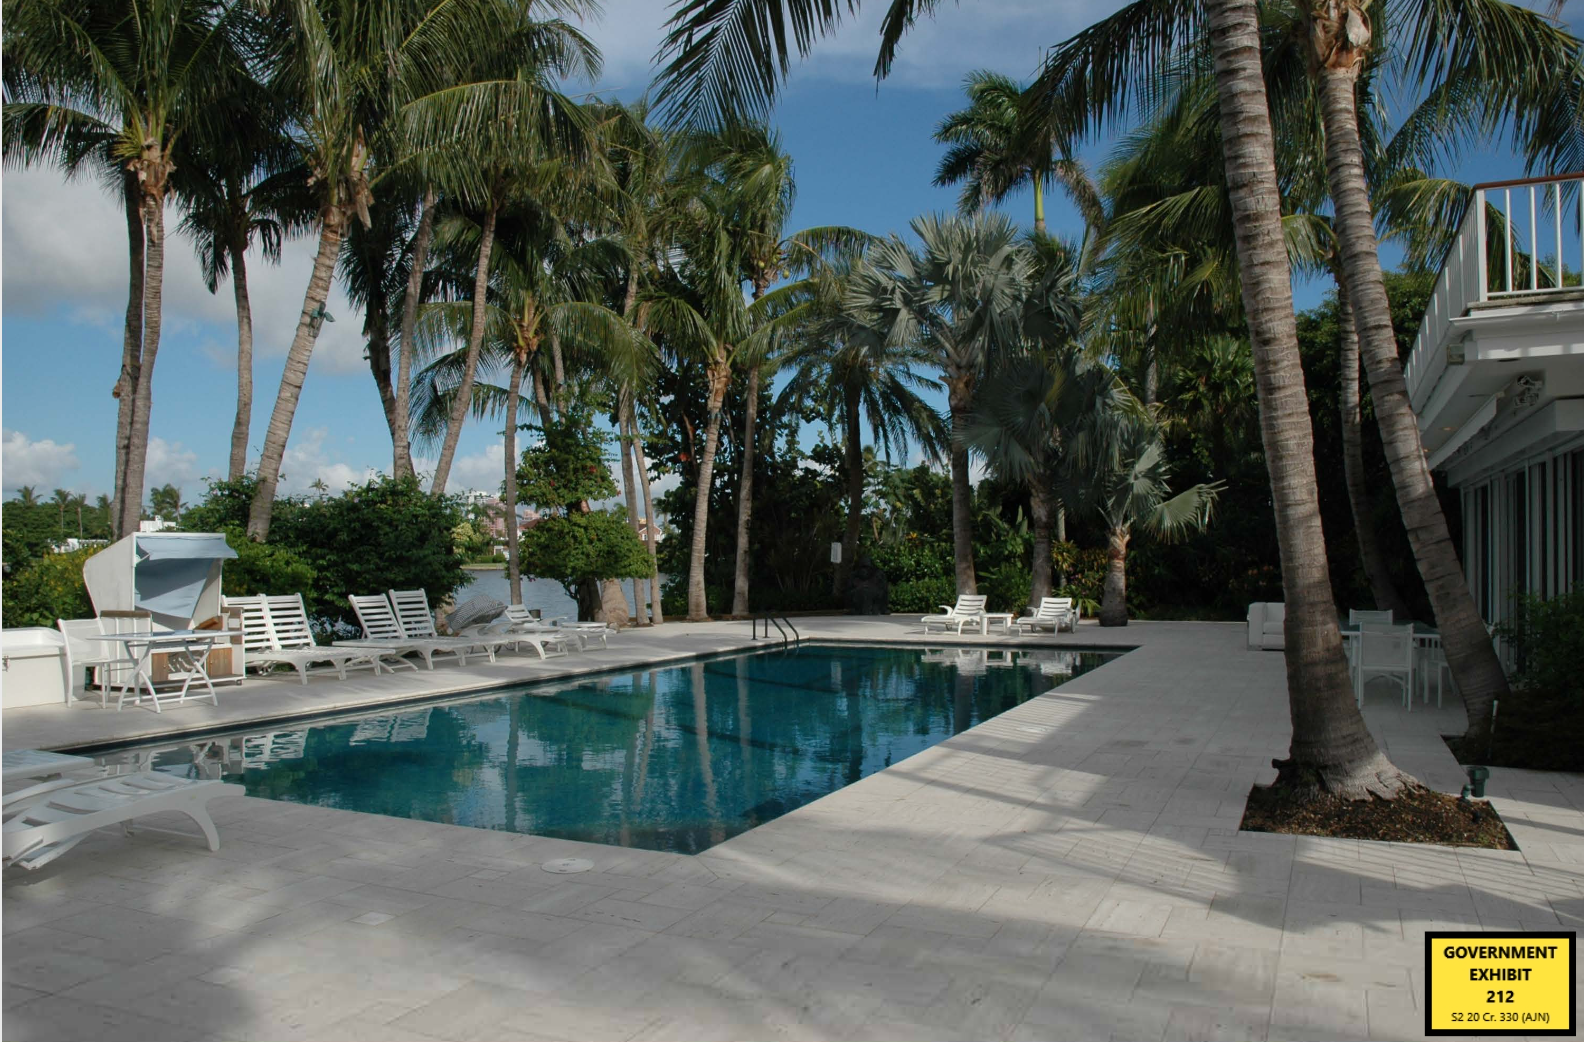 The outdoor pool where Epstein would entertain guests